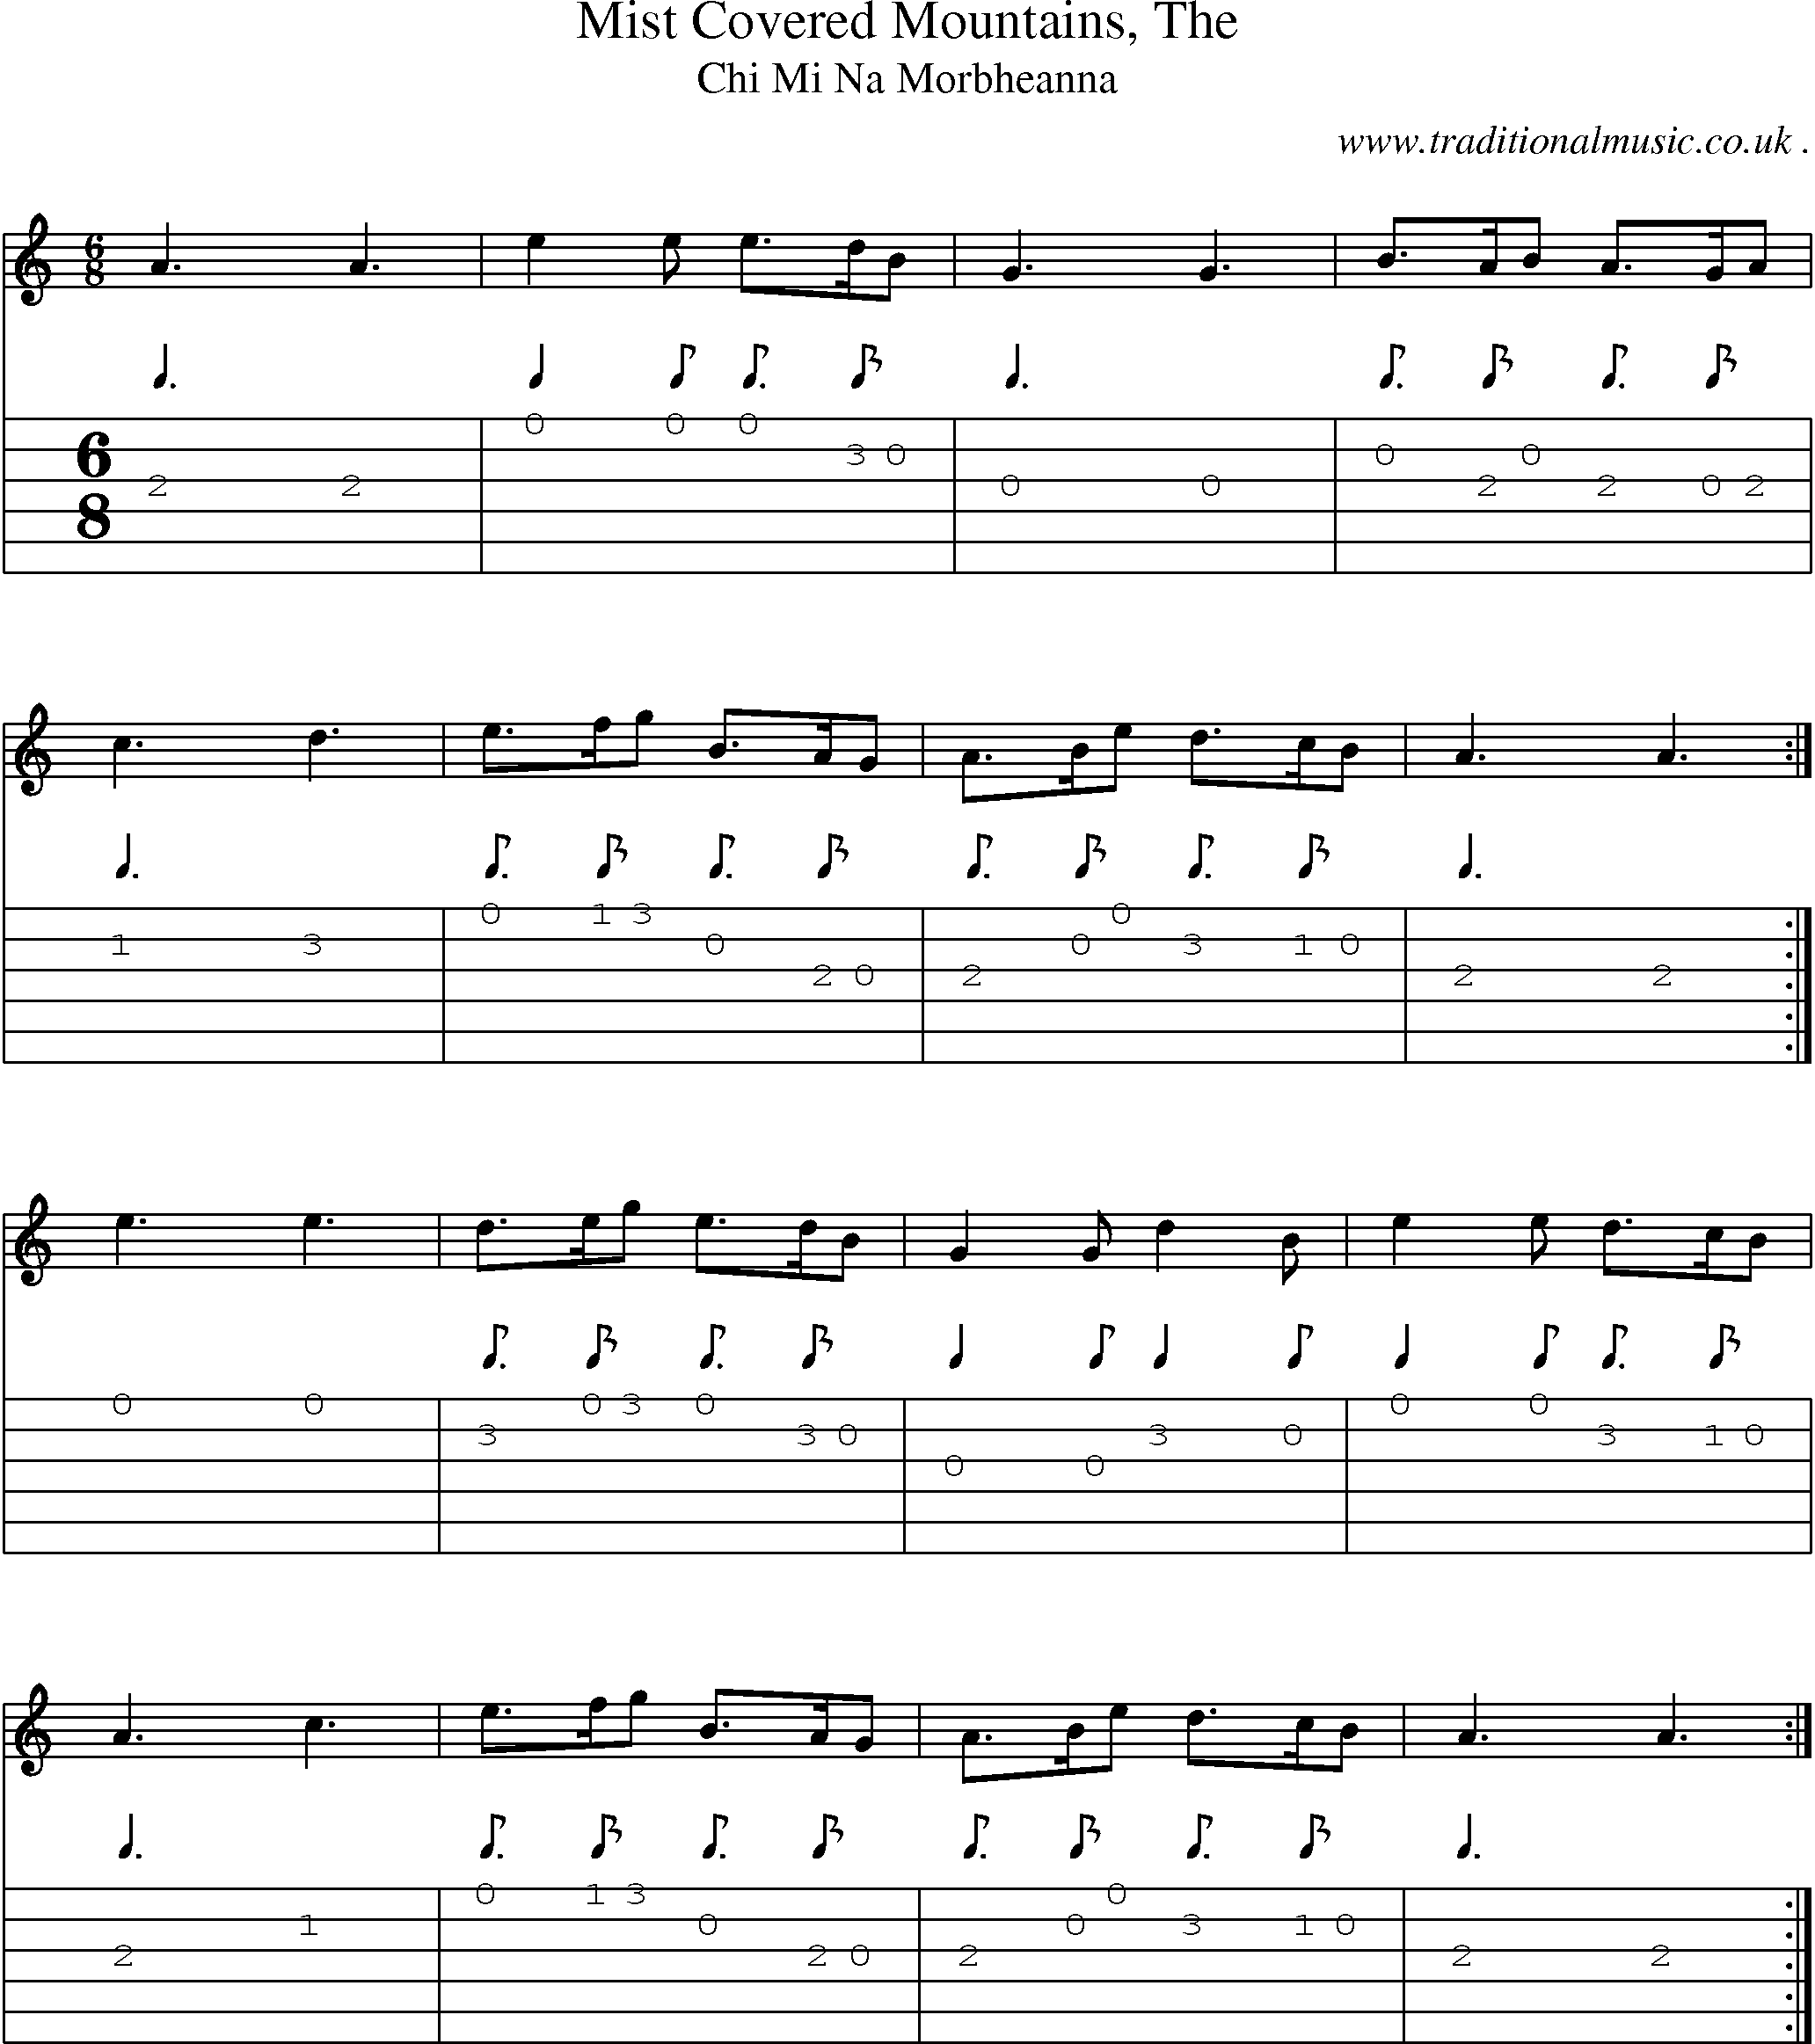 Sheet-music  score, Chords and Guitar Tabs for Mist Covered Mountains The